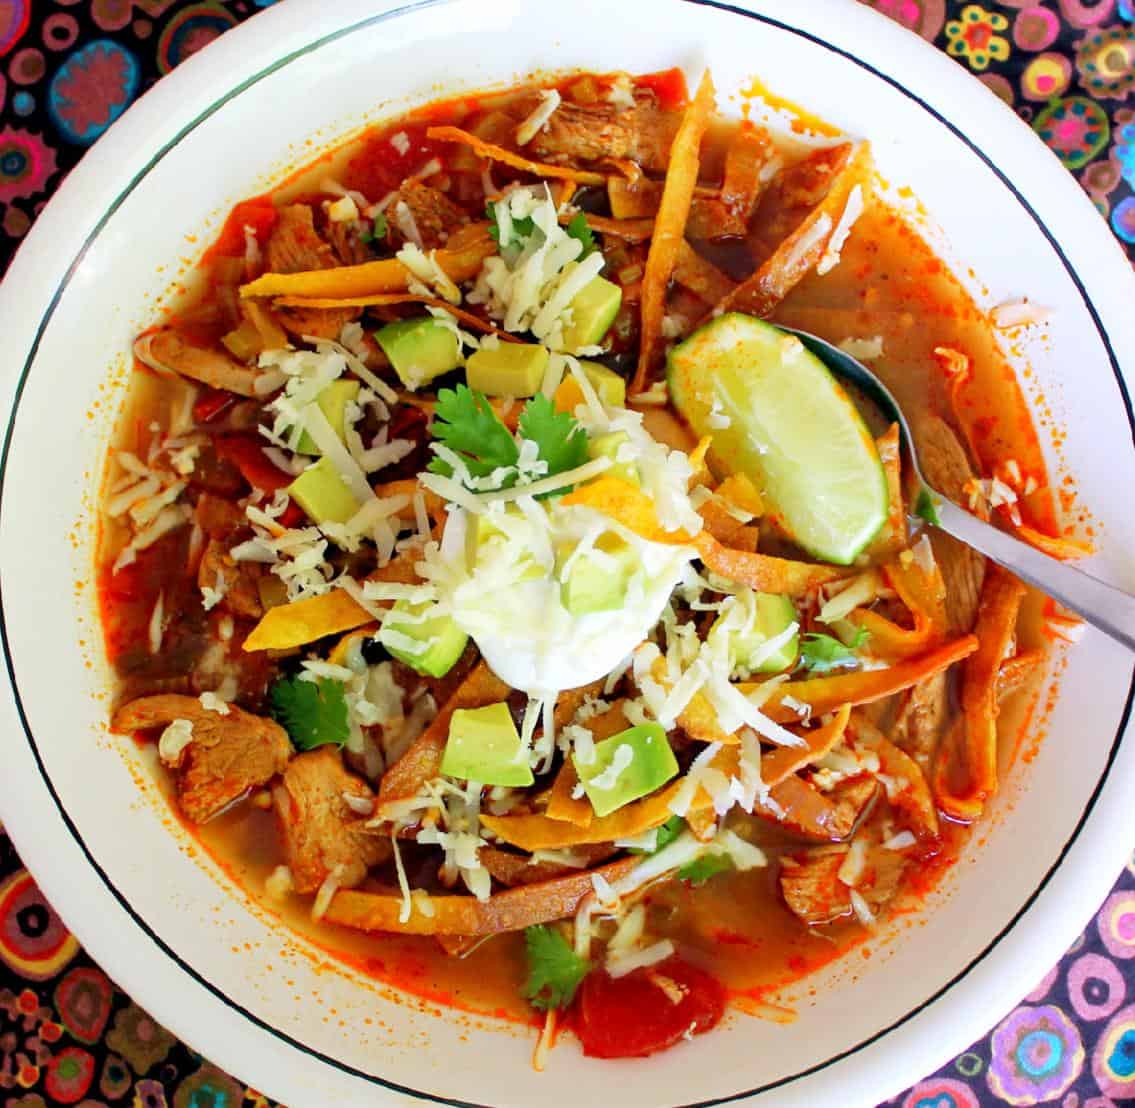  Warm up with a bowl of Pastor Tom's Tortilla Soup!